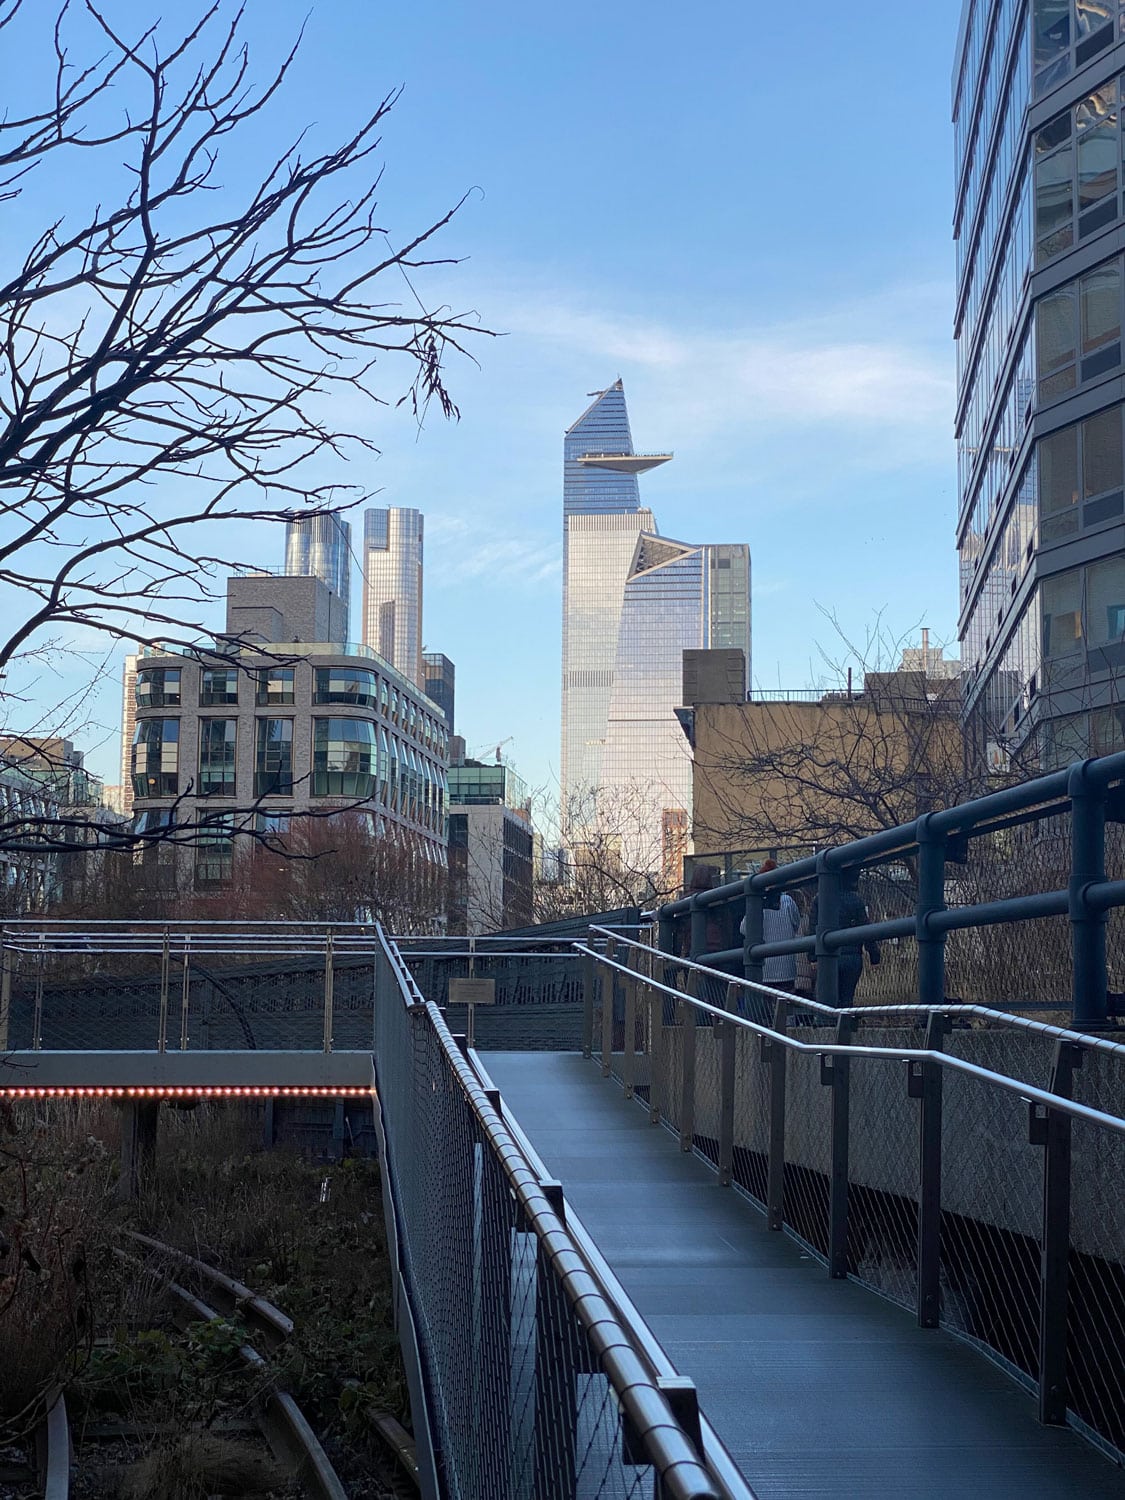 The view of The Edge building from the beautiful High Line in New York City end at the Vessel inn Hudson Yards